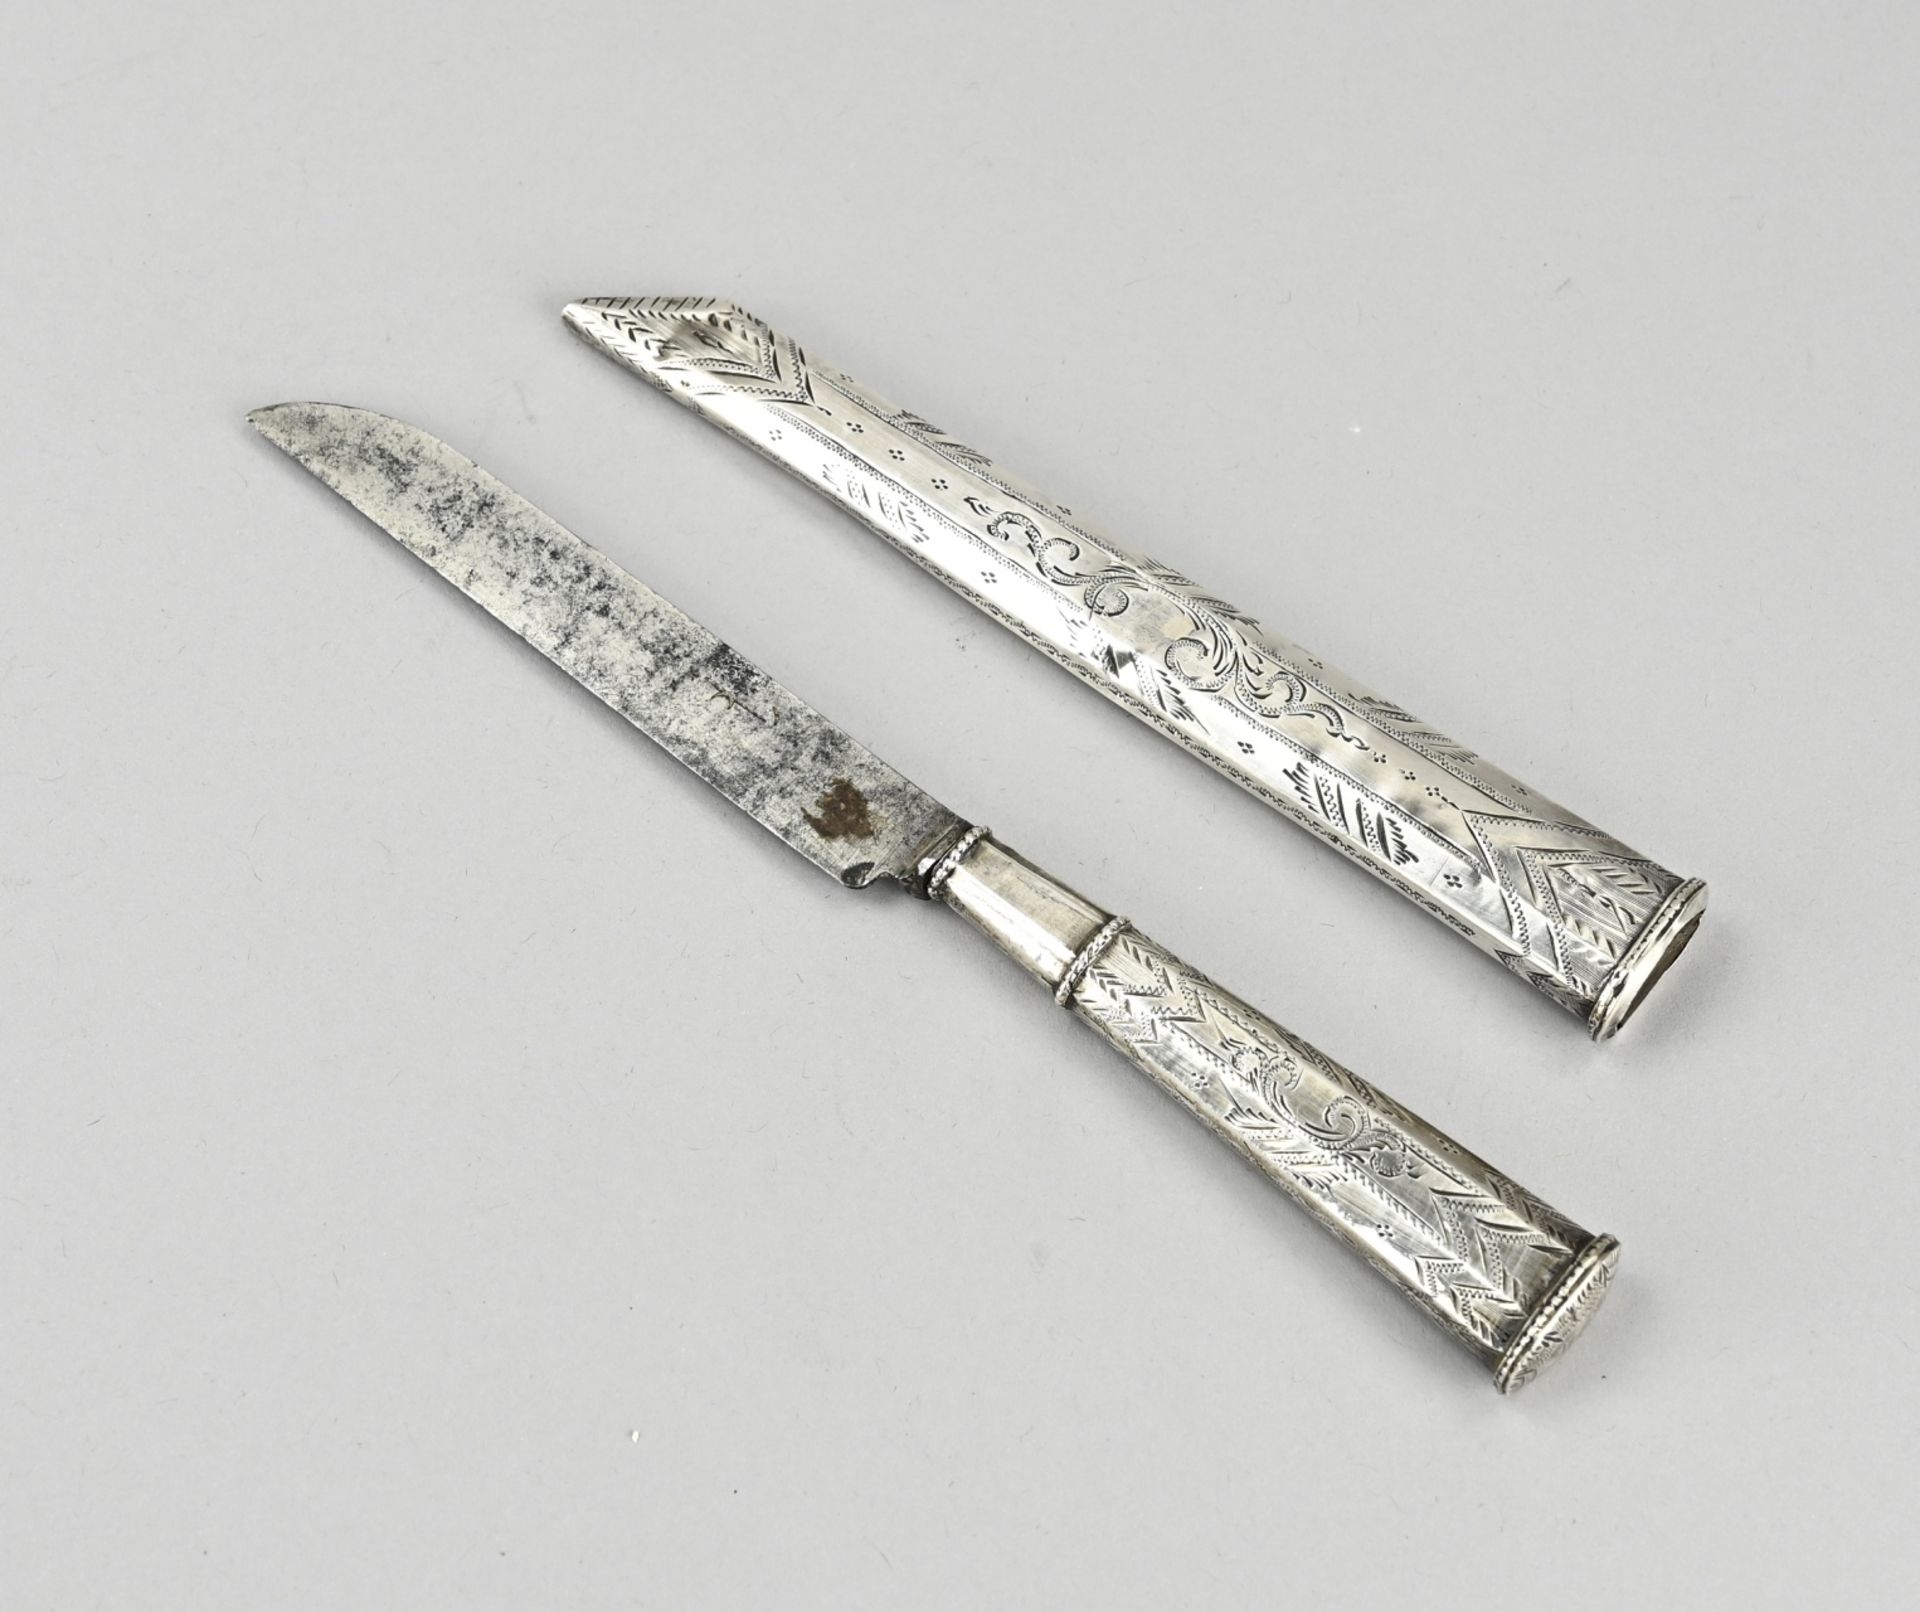 Travel knife with silver sheath, 18th century - Image 2 of 2